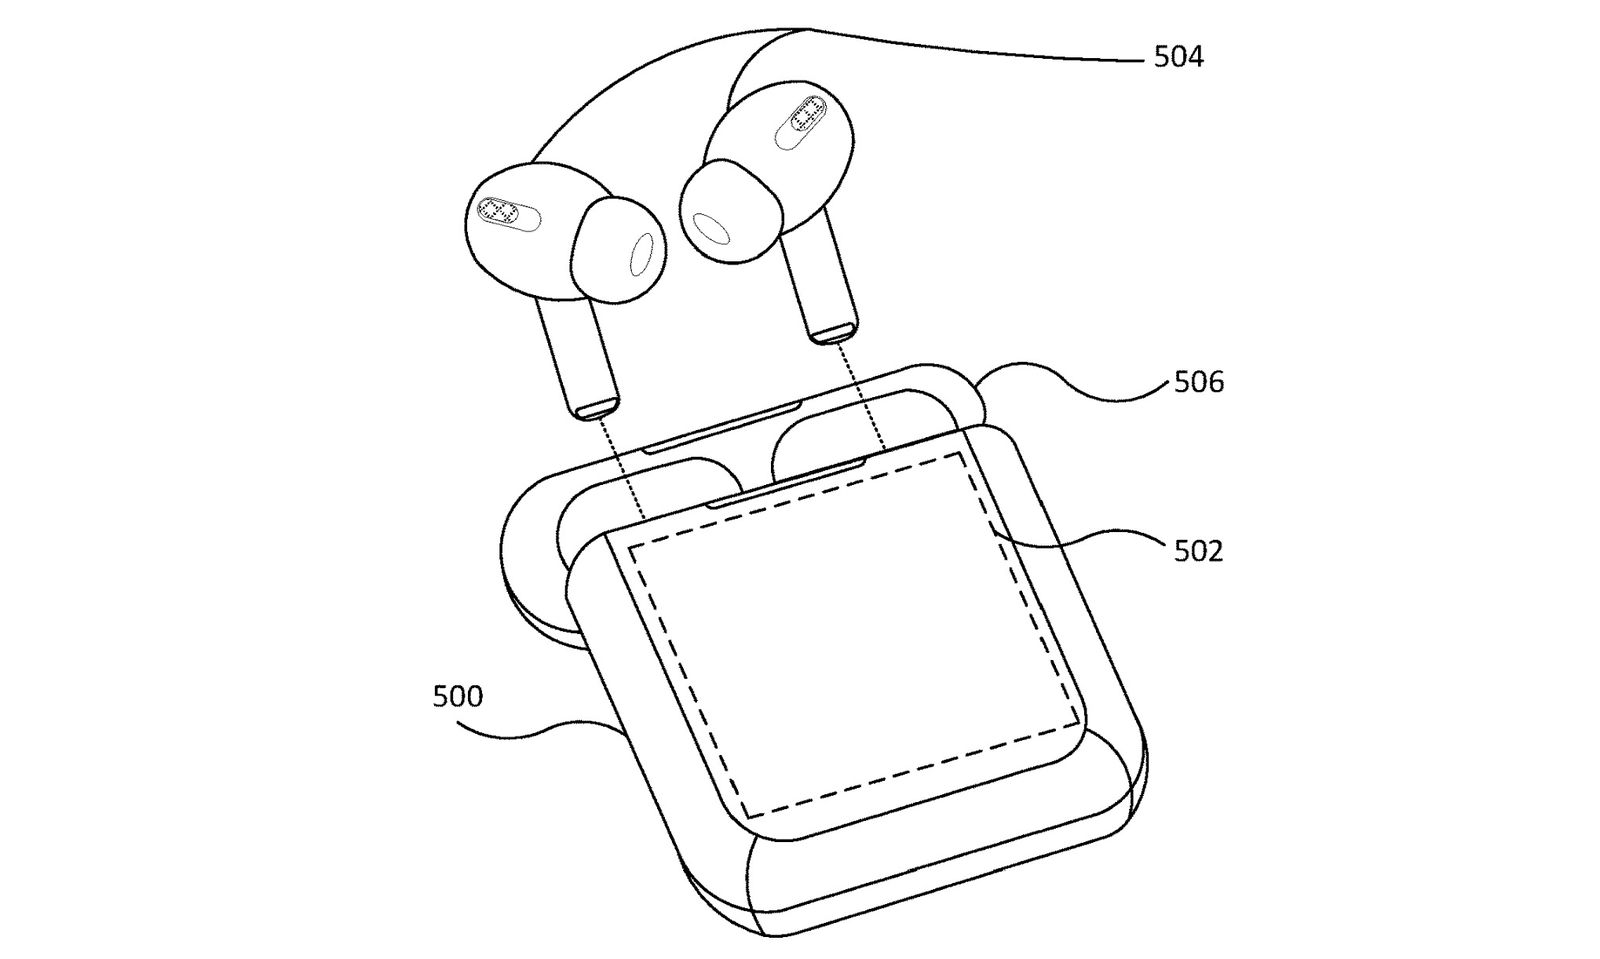 AirPods case with display patent design.